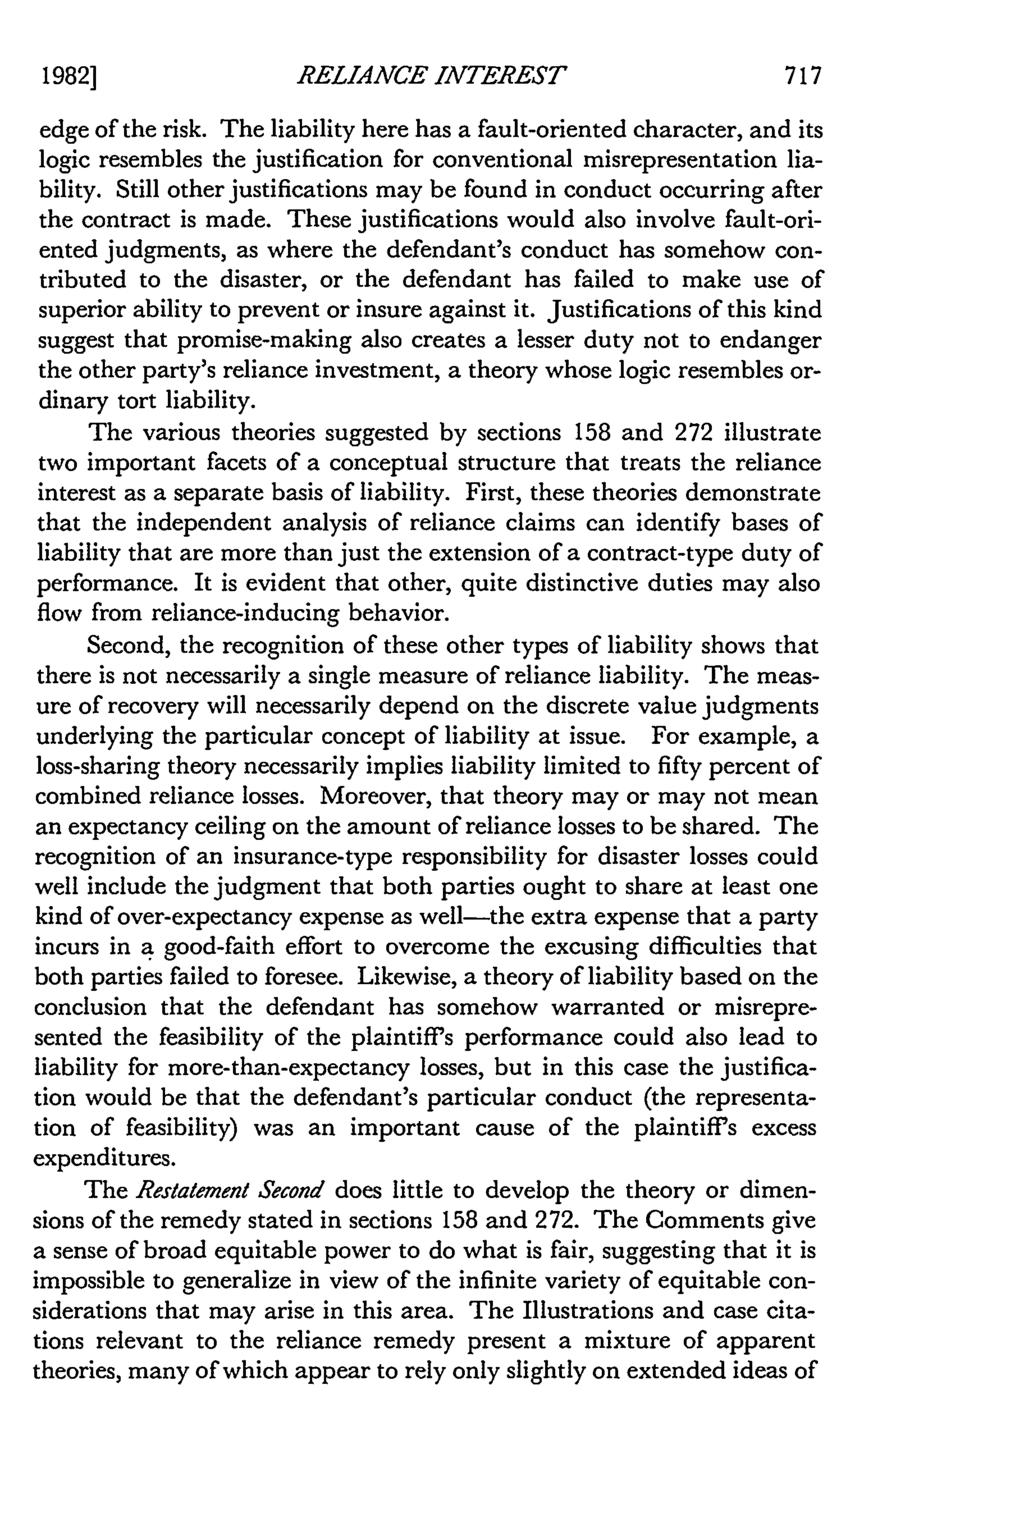 1982] RELIANCE INTEREST edge of the risk. The liability here has a fault-oriented character, and its logic resembles the justification for conventional misrepresentation liability.